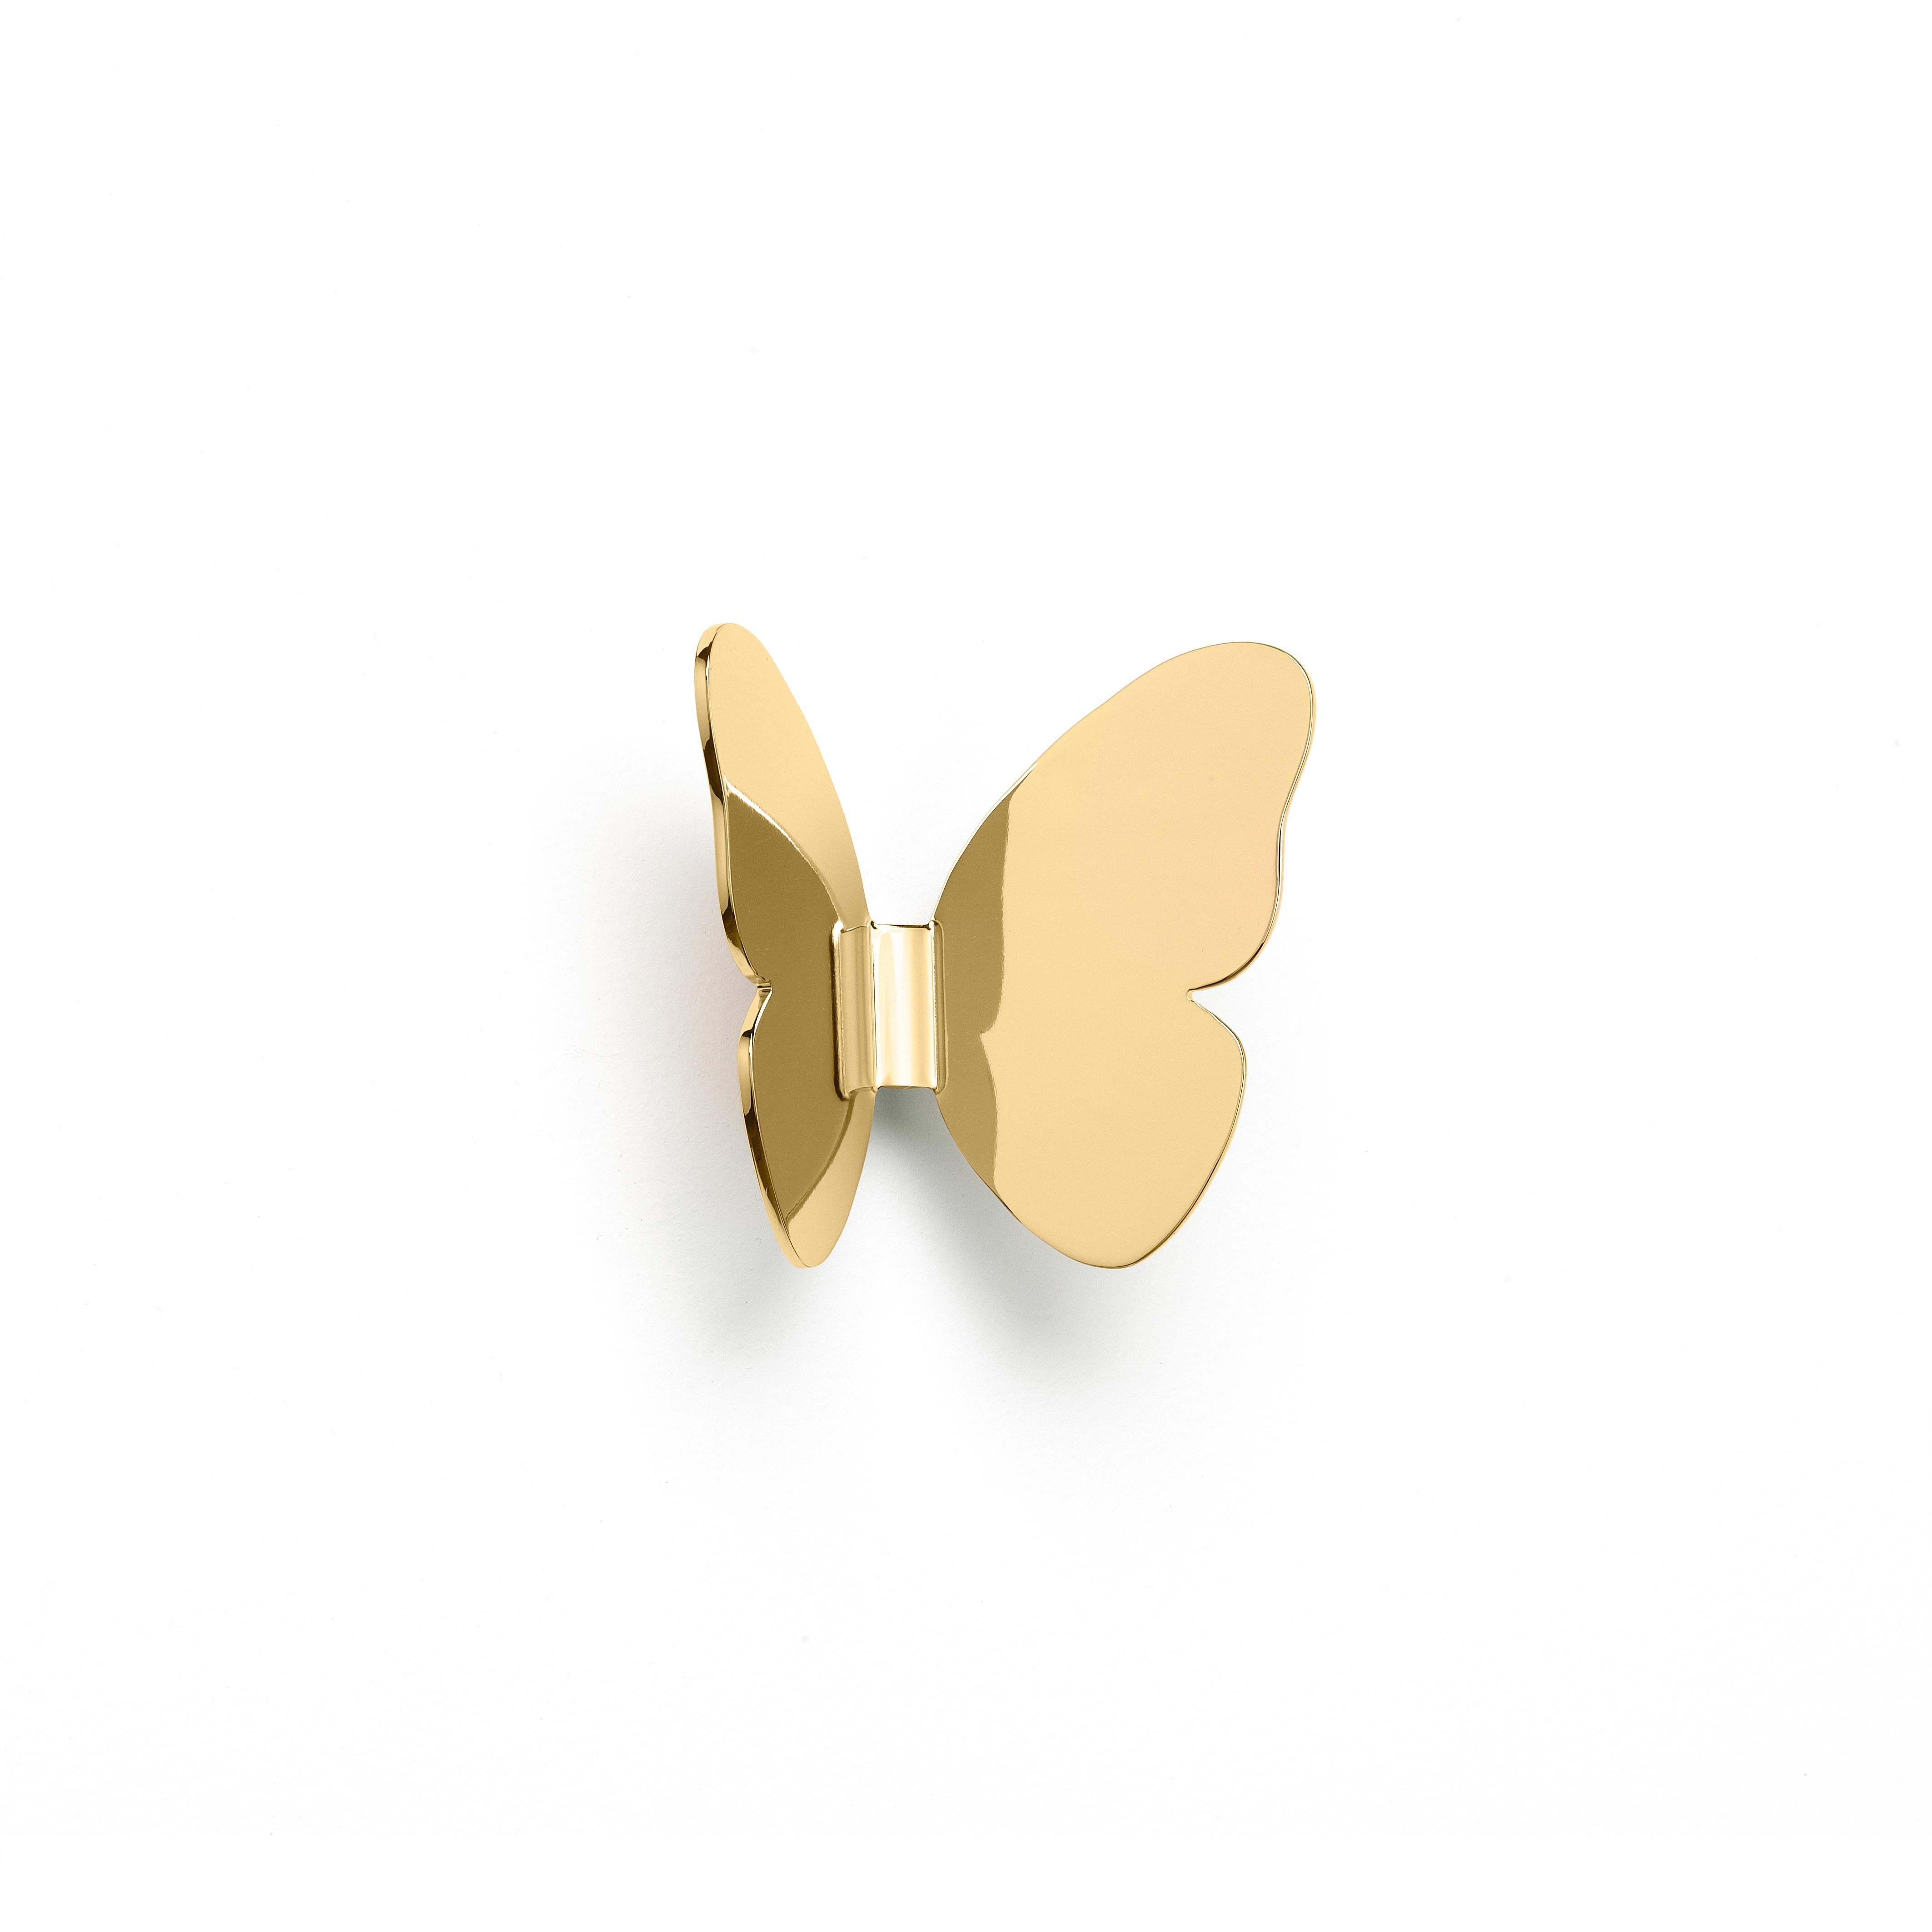 Coatrack in stainless steel
The single butterfly coat hanger is both playful and elegant and gives to customers the possibility to embellish in a brand new way the walls of their houses.
 